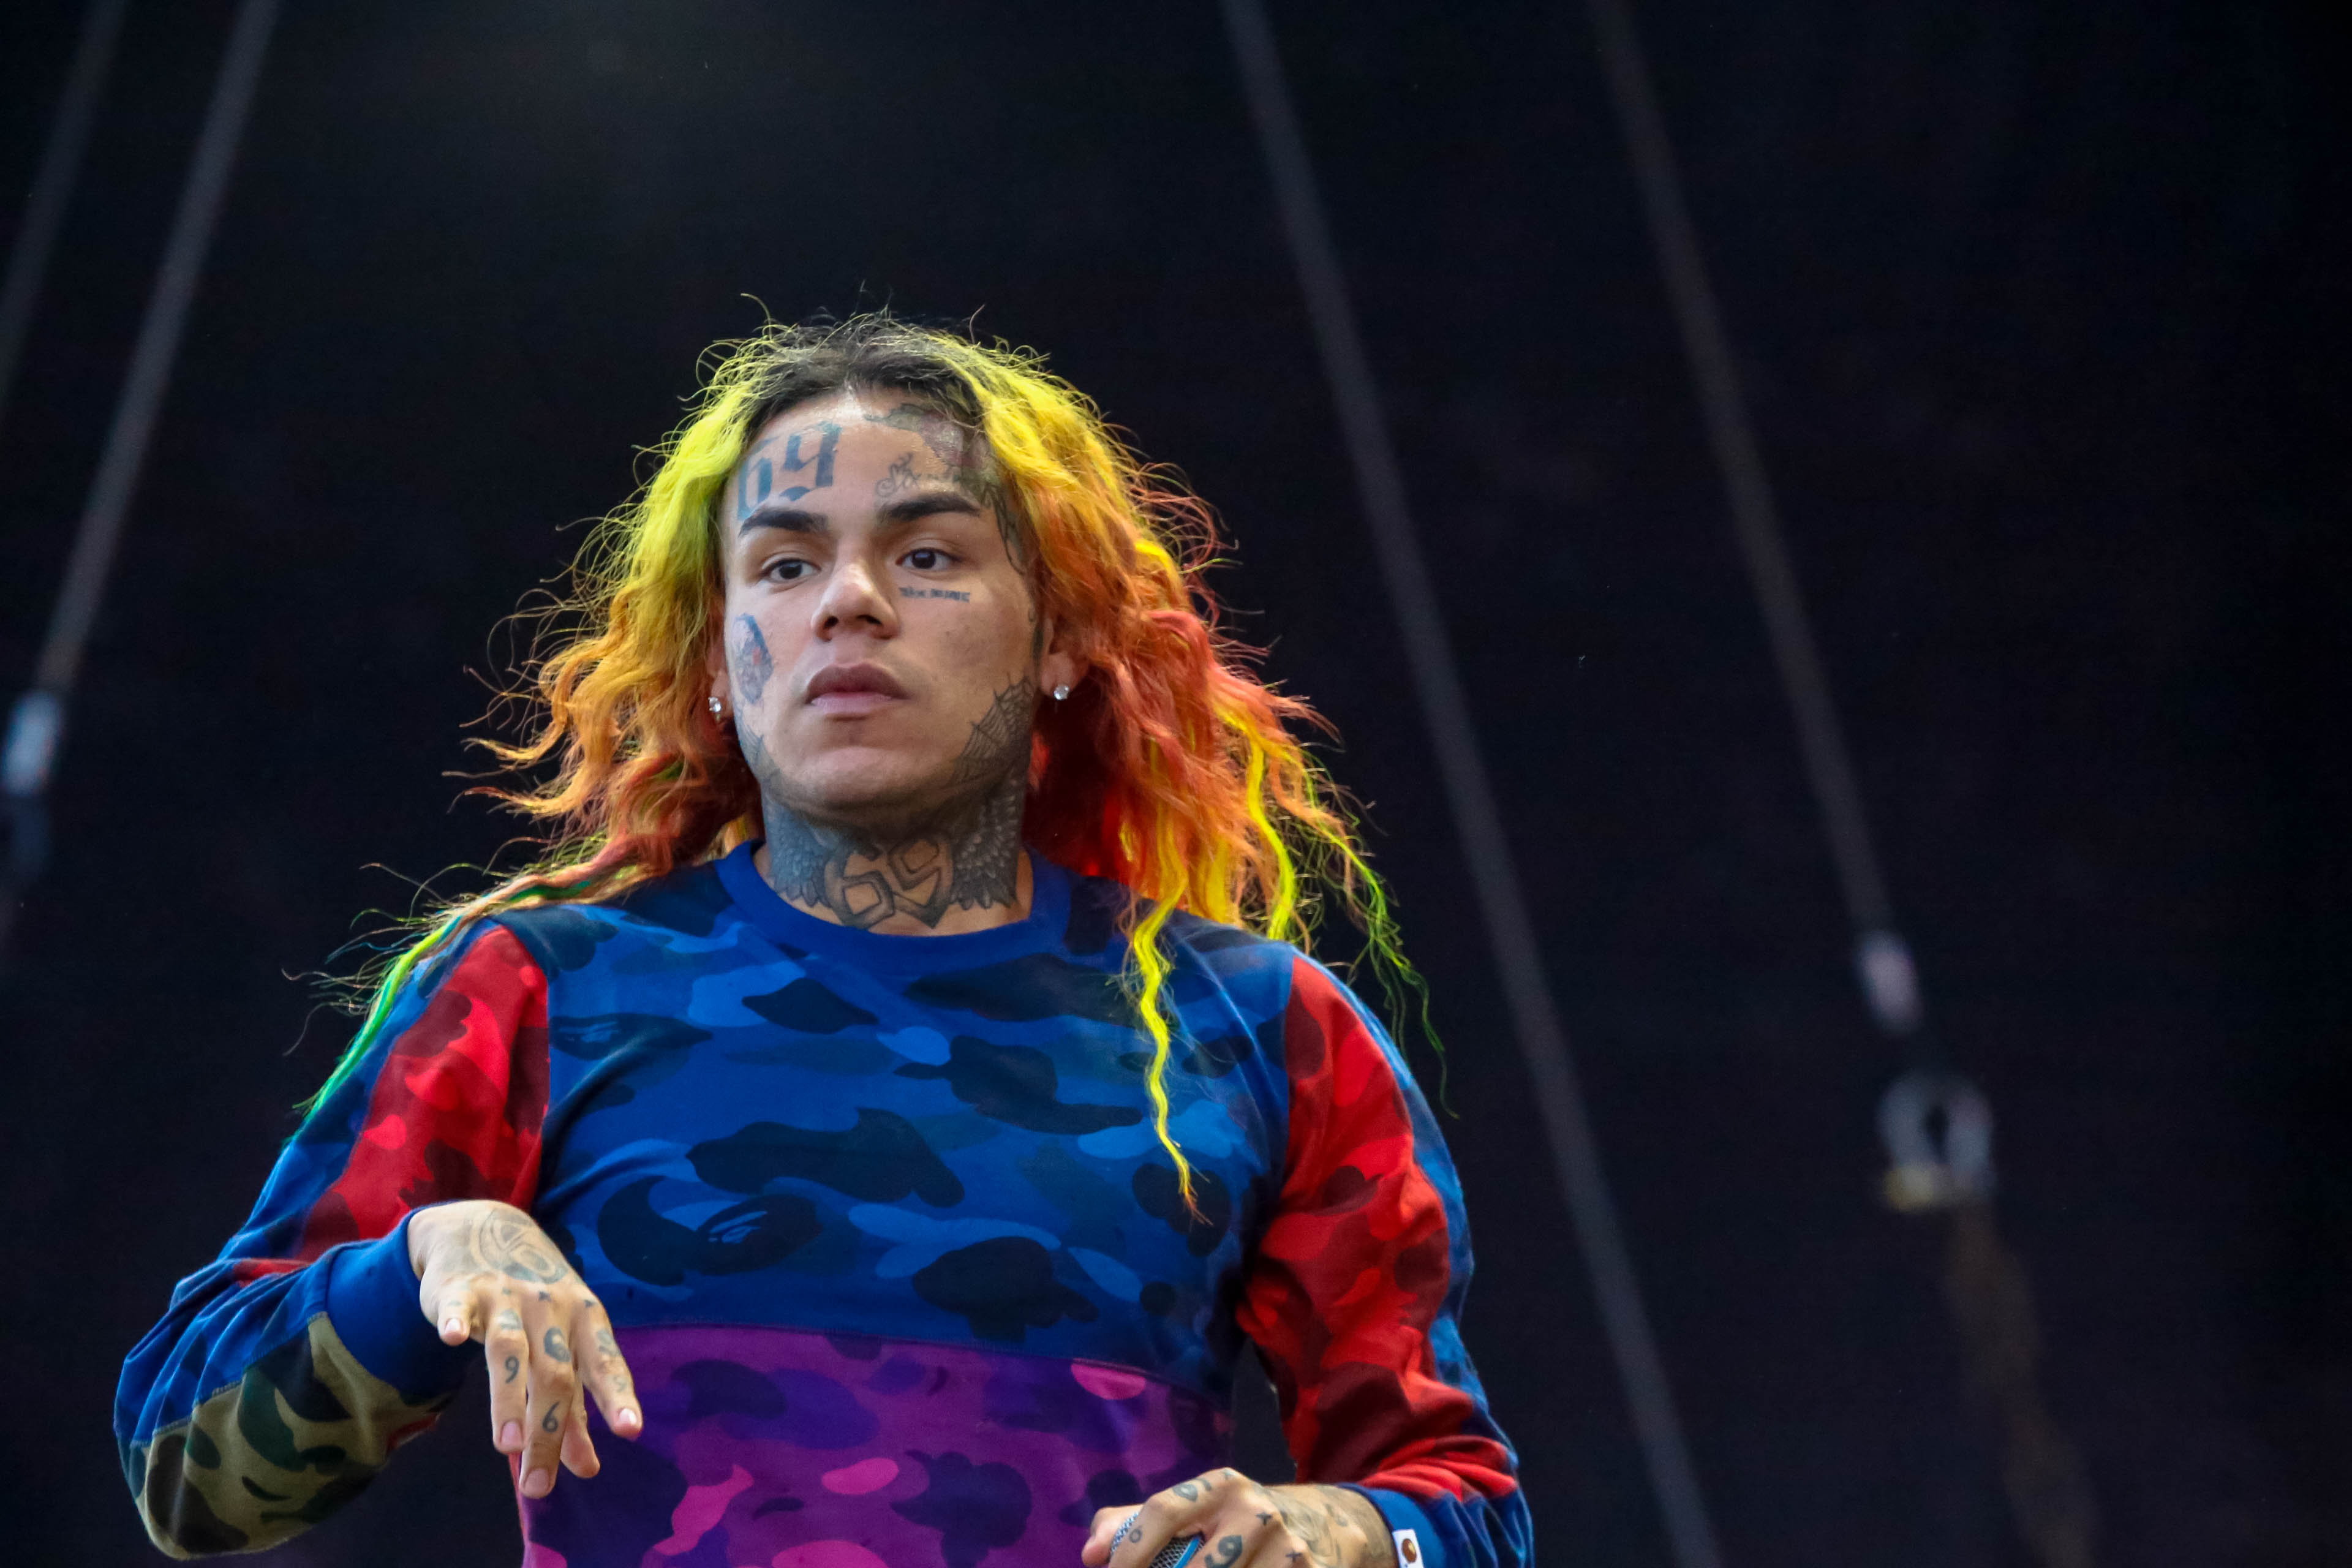 Tekashi 6ix9ine To Be Re Sentenced For Sexual Video Of 13 Year Old Girl